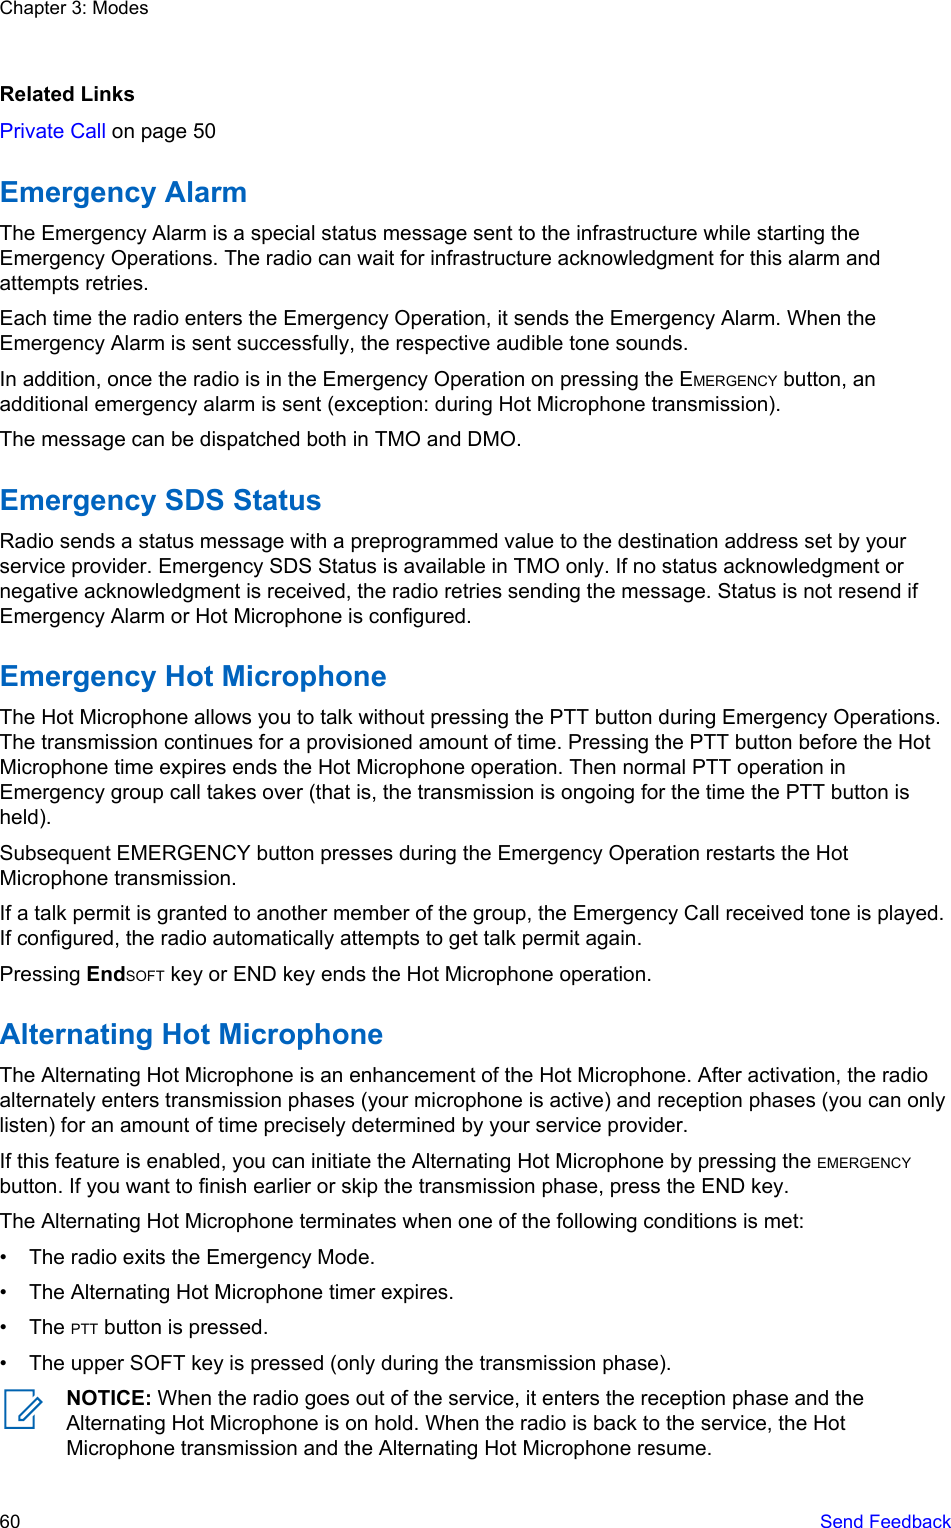 Related LinksPrivate Call on page 50Emergency AlarmThe Emergency Alarm is a special status message sent to the infrastructure while starting theEmergency Operations. The radio can wait for infrastructure acknowledgment for this alarm andattempts retries.Each time the radio enters the Emergency Operation, it sends the Emergency Alarm. When theEmergency Alarm is sent successfully, the respective audible tone sounds.In addition, once the radio is in the Emergency Operation on pressing the EMERGENCY button, anadditional emergency alarm is sent (exception: during Hot Microphone transmission).The message can be dispatched both in TMO and DMO.Emergency SDS StatusRadio sends a status message with a preprogrammed value to the destination address set by yourservice provider. Emergency SDS Status is available in TMO only. If no status acknowledgment ornegative acknowledgment is received, the radio retries sending the message. Status is not resend ifEmergency Alarm or Hot Microphone is configured.Emergency Hot MicrophoneThe Hot Microphone allows you to talk without pressing the PTT button during Emergency Operations.The transmission continues for a provisioned amount of time. Pressing the PTT button before the HotMicrophone time expires ends the Hot Microphone operation. Then normal PTT operation inEmergency group call takes over (that is, the transmission is ongoing for the time the PTT button isheld).Subsequent EMERGENCY button presses during the Emergency Operation restarts the HotMicrophone transmission.If a talk permit is granted to another member of the group, the Emergency Call received tone is played.If configured, the radio automatically attempts to get talk permit again.Pressing EndSOFT key or END key ends the Hot Microphone operation.Alternating Hot MicrophoneThe Alternating Hot Microphone is an enhancement of the Hot Microphone. After activation, the radioalternately enters transmission phases (your microphone is active) and reception phases (you can onlylisten) for an amount of time precisely determined by your service provider.If this feature is enabled, you can initiate the Alternating Hot Microphone by pressing the EMERGENCYbutton. If you want to finish earlier or skip the transmission phase, press the END key.The Alternating Hot Microphone terminates when one of the following conditions is met:• The radio exits the Emergency Mode.• The Alternating Hot Microphone timer expires.• The PTT button is pressed.• The upper SOFT key is pressed (only during the transmission phase).NOTICE: When the radio goes out of the service, it enters the reception phase and theAlternating Hot Microphone is on hold. When the radio is back to the service, the HotMicrophone transmission and the Alternating Hot Microphone resume.Chapter 3: Modes60   Send Feedback